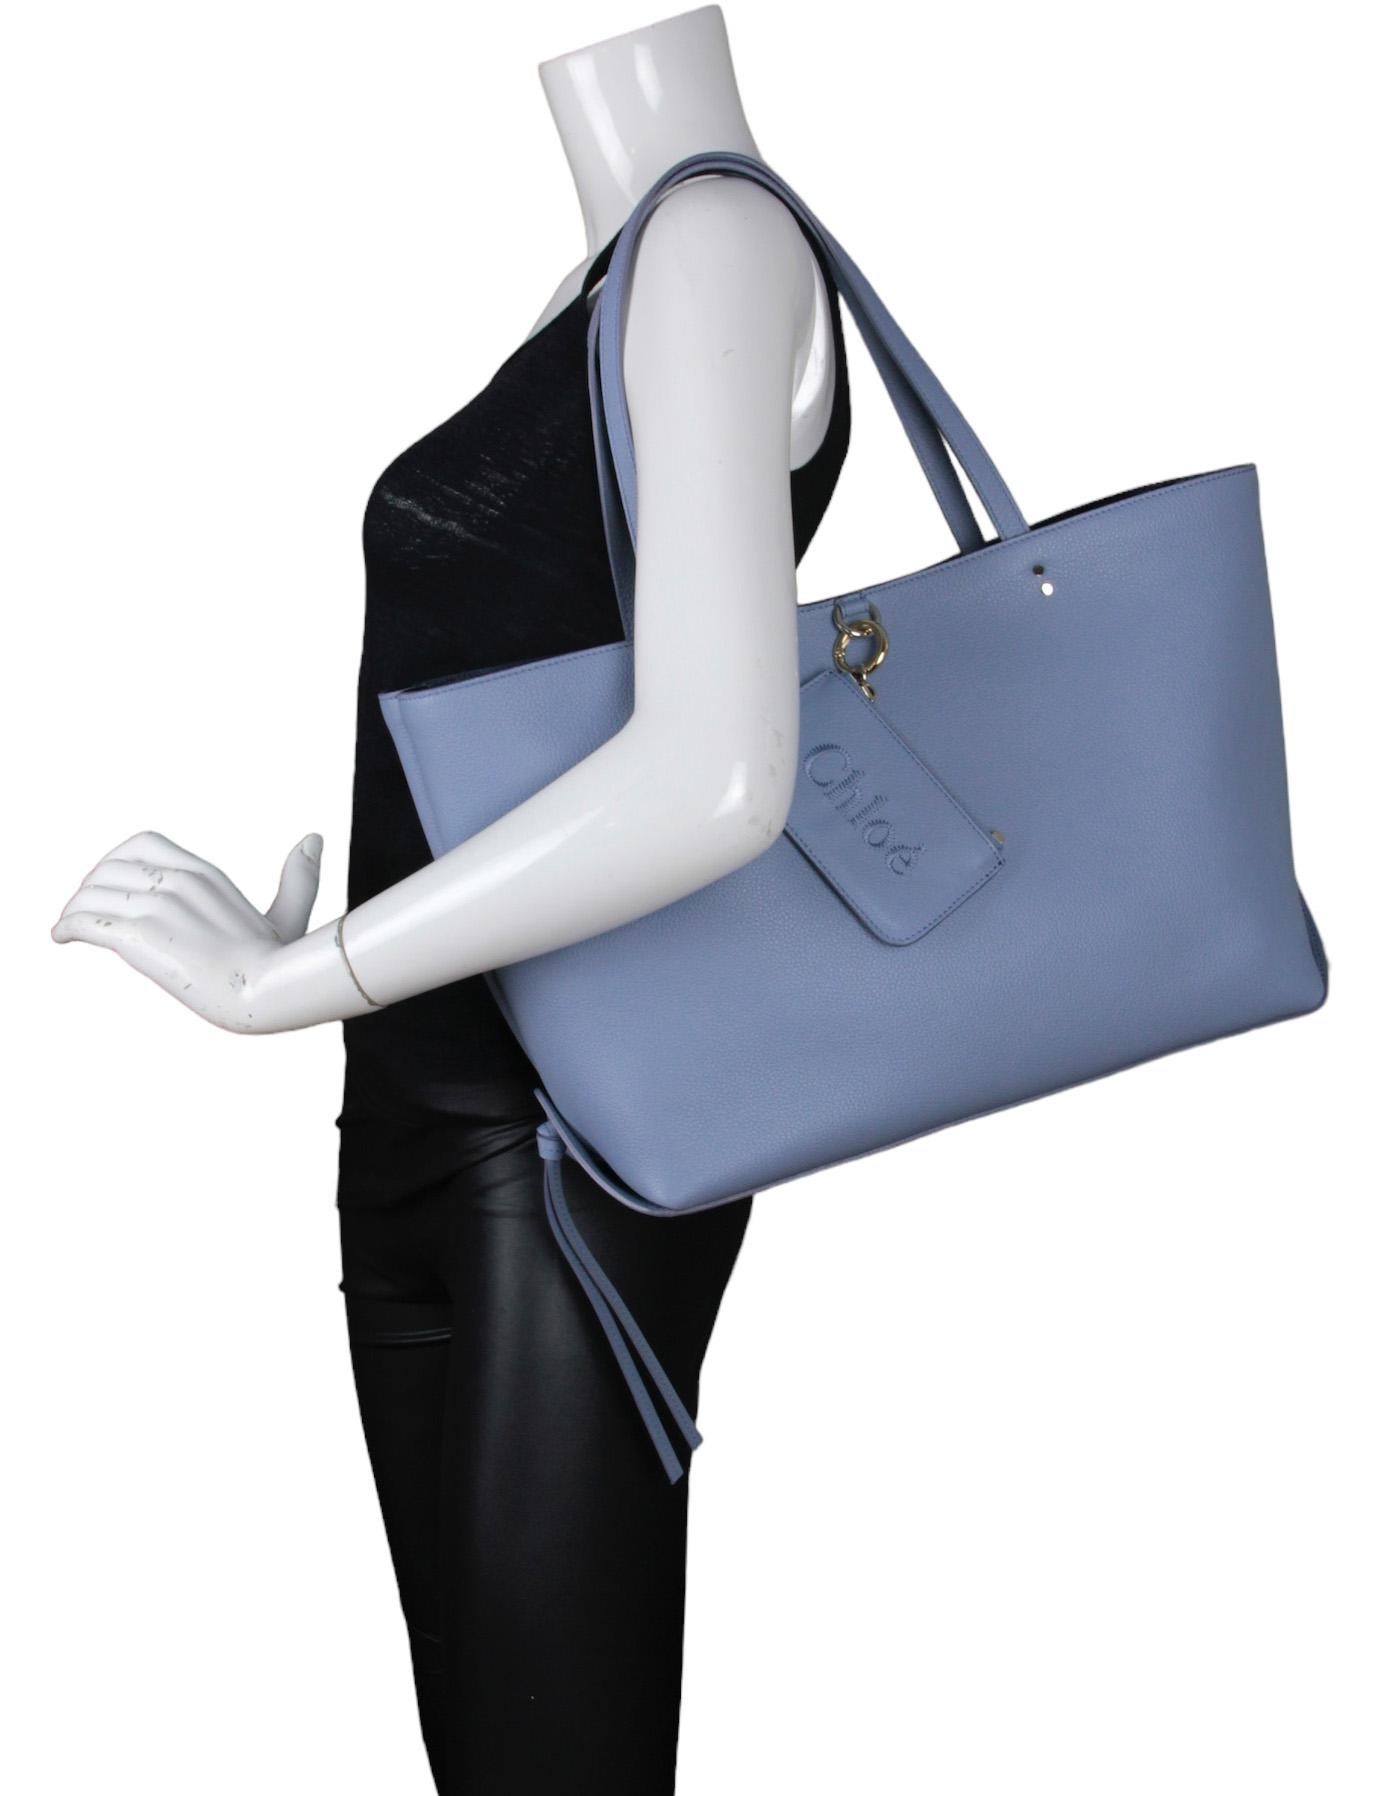 Chloe Shady Cobalt Blue Calfskin Leather Sense Tote Bag

Made In: Italy
Color: Shady cobalt blue
Hardware: Pale goldtone
Materials: Grained calfskin leather
Lining: Suede lining
Closure/Opening: Open top
Exterior Pockets: Detachable zip